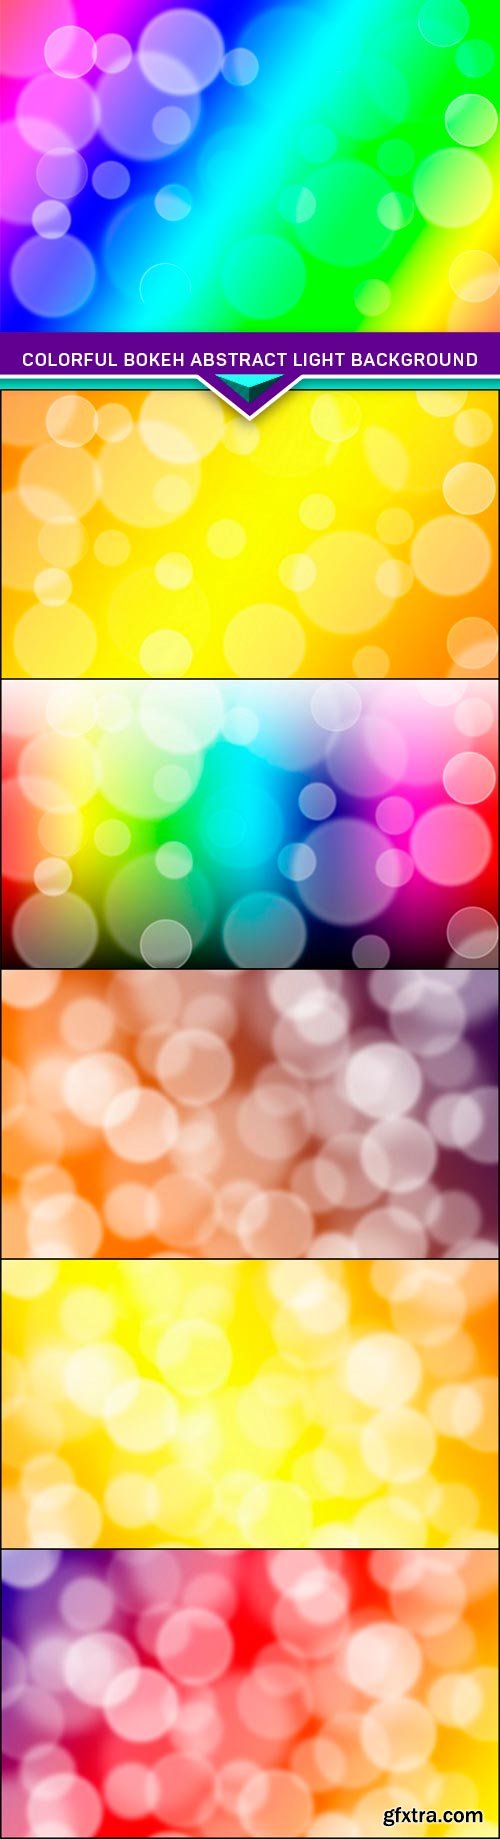 Colorful bokeh abstract light background 6x JPEG